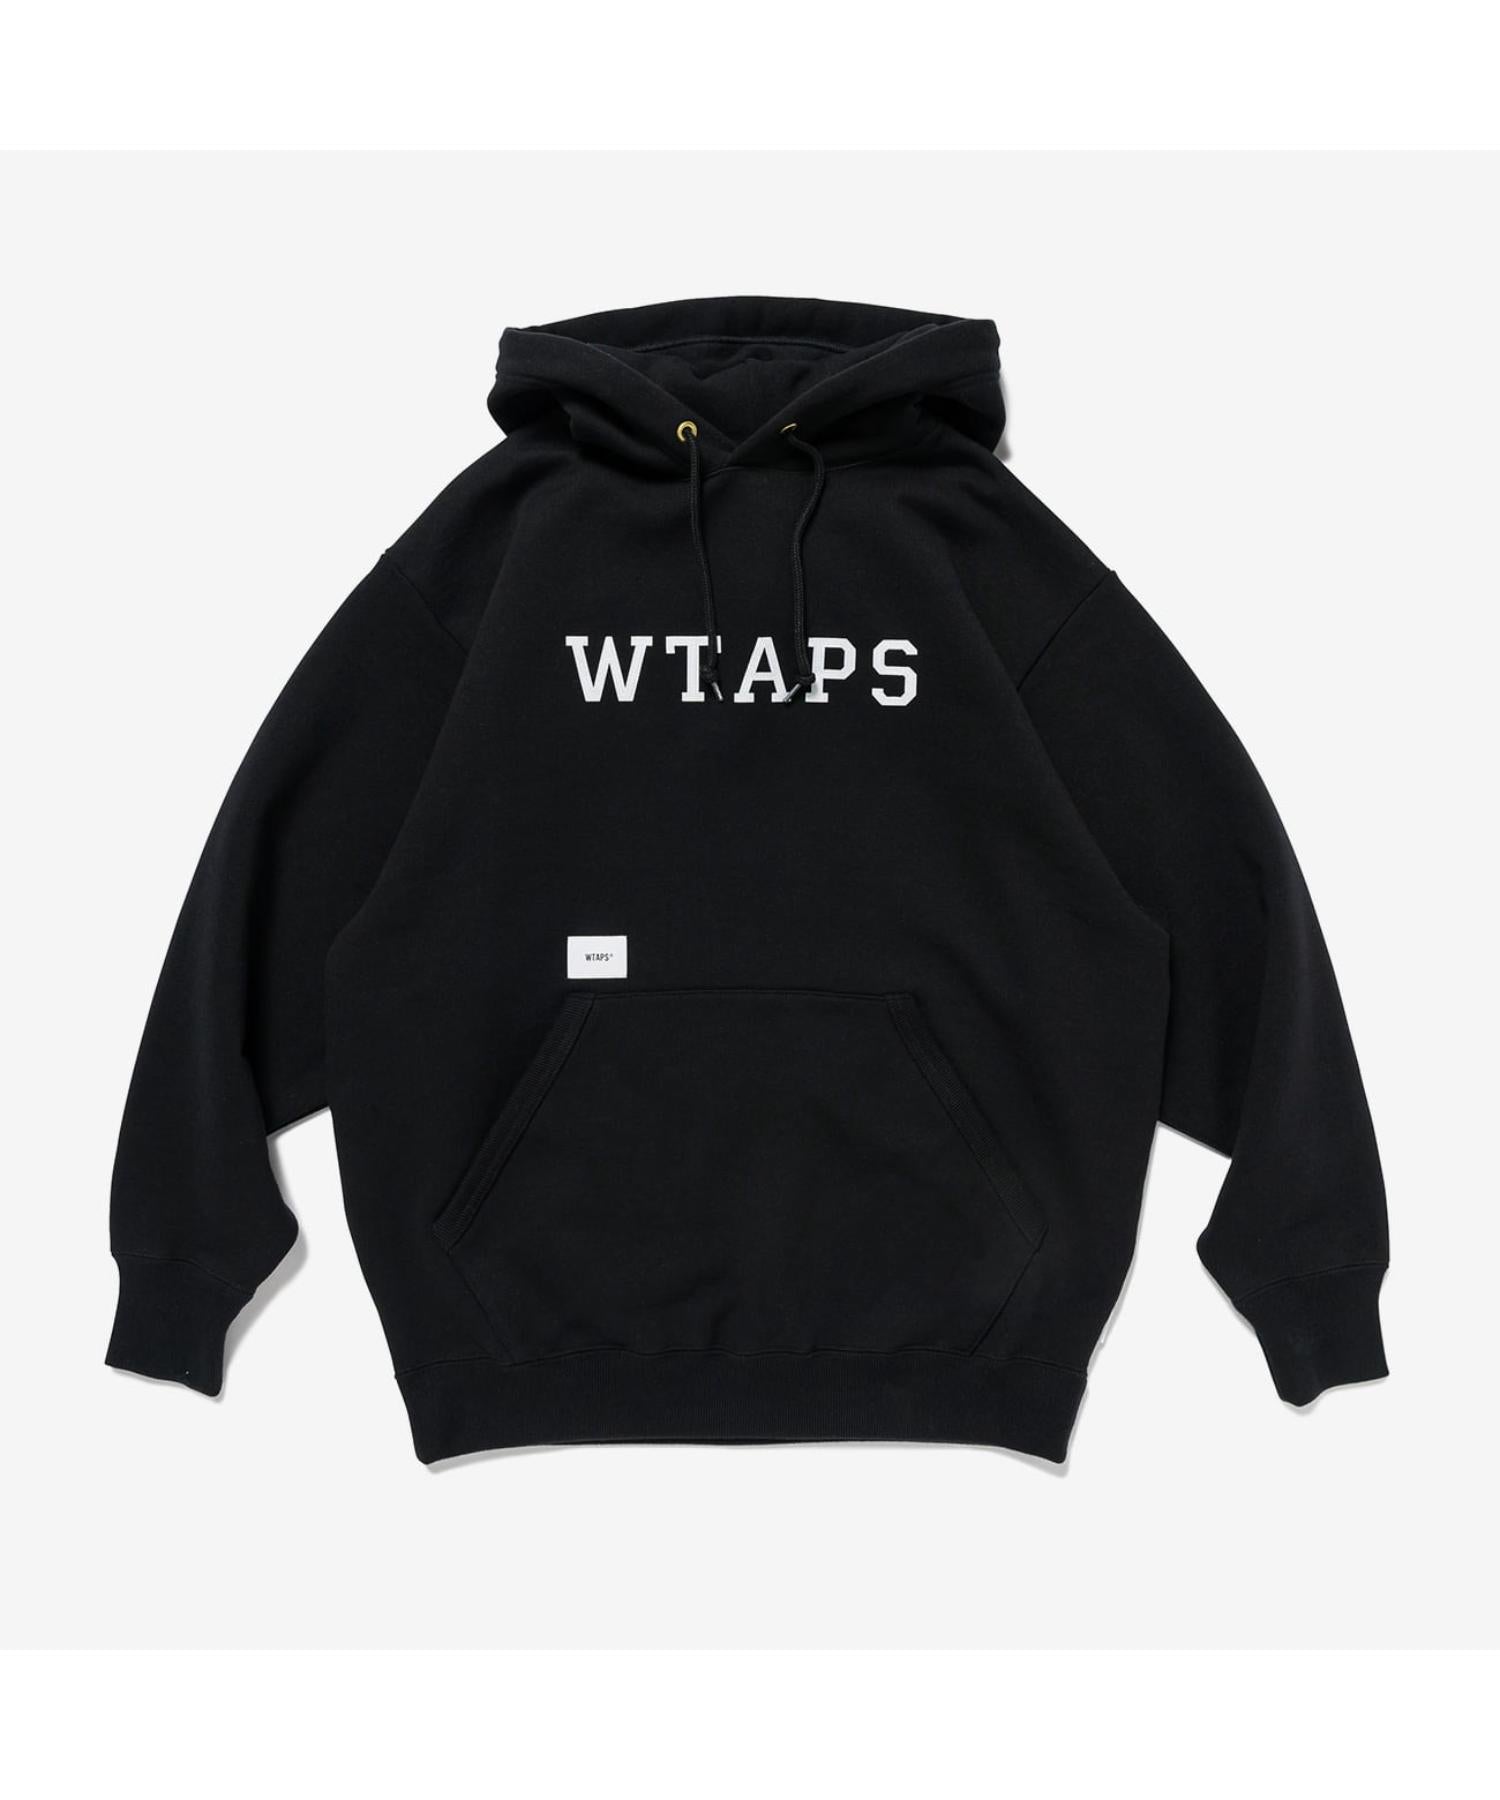 ACADEMY / HOODY / COTTON. COLLEGE - WTAPS (ダブルタップス) - tops ...